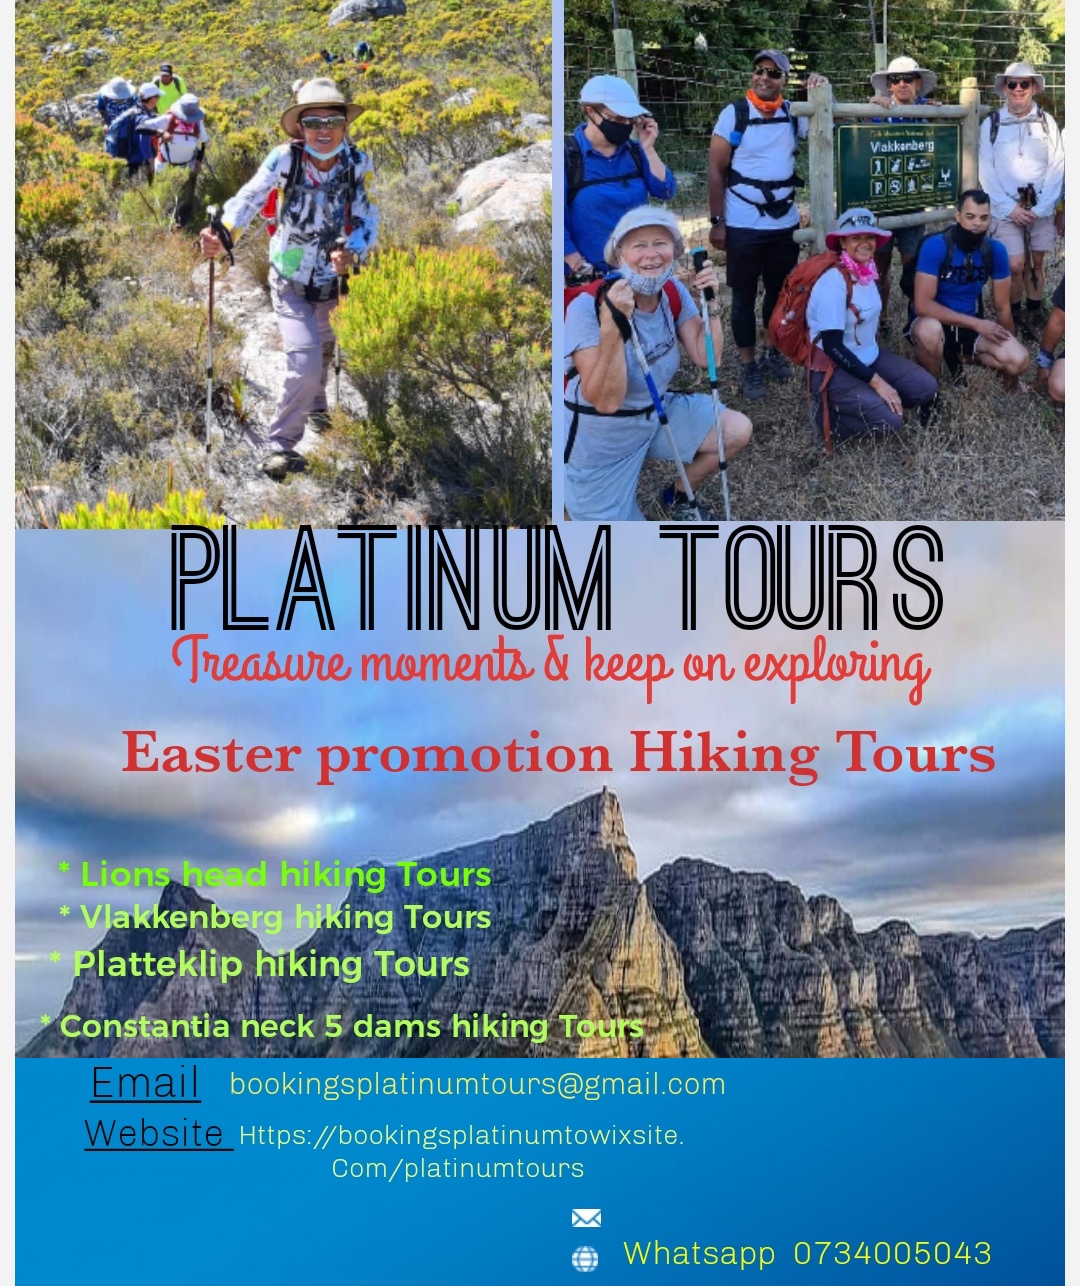 EASTER SPECIAL HIKING TOURS PROMOTION